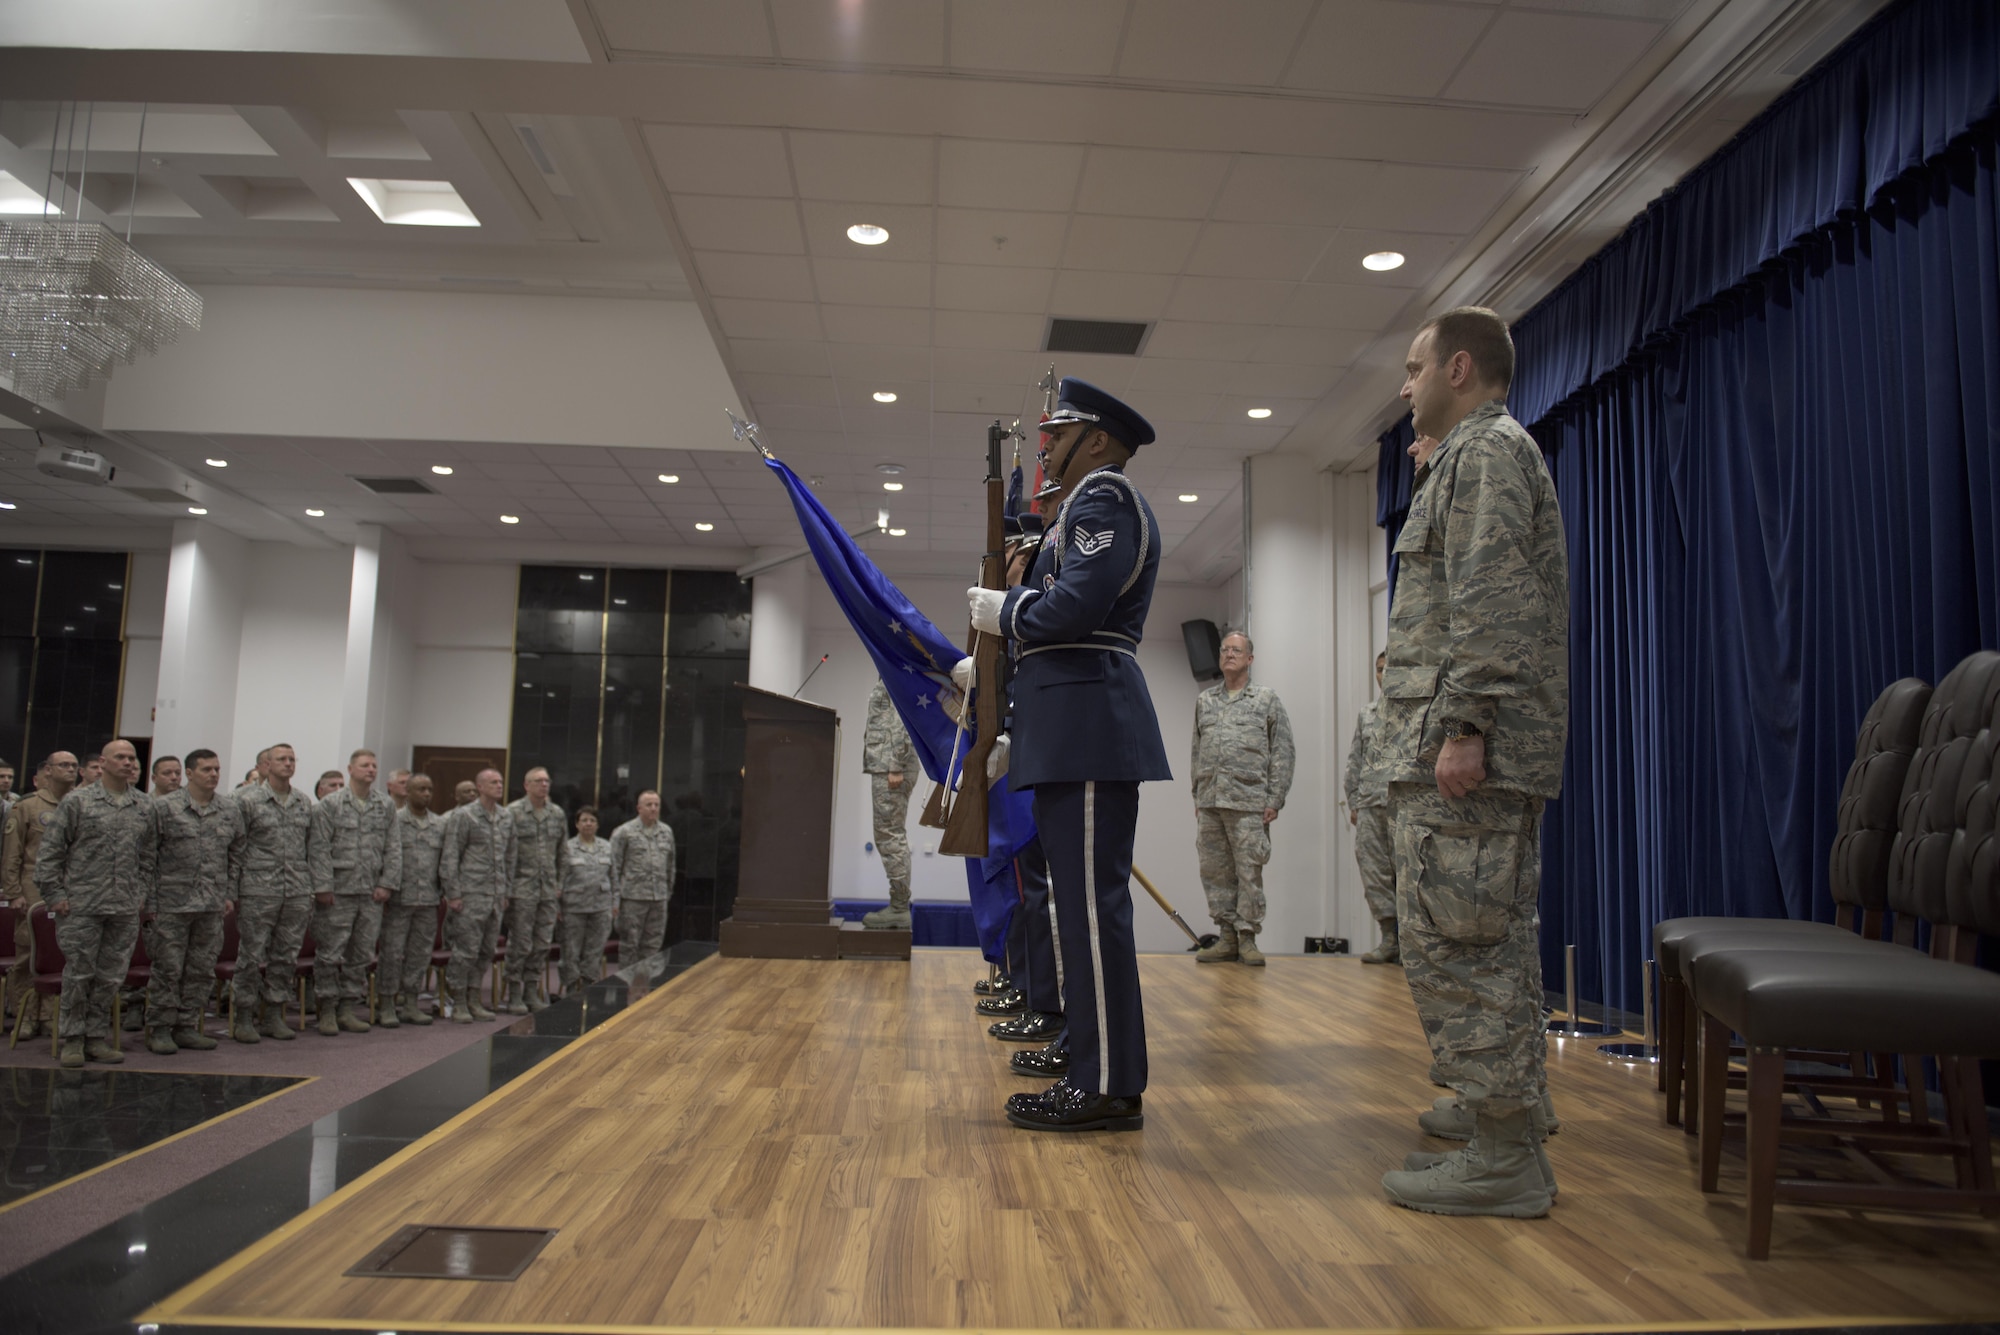 Members of the Incirlik Air Base Honor Guard present the Turkish and American flags during the 39th Medical Group change of command ceremony May 27, 2017, at Incirlik Air Base, Turkey. During the ceremony, Col. Thomas A. Bacon relinquished command to Col. Vito Smyth. (U.S. Air Force photo by Airman 1st Class Kristan Campbell)